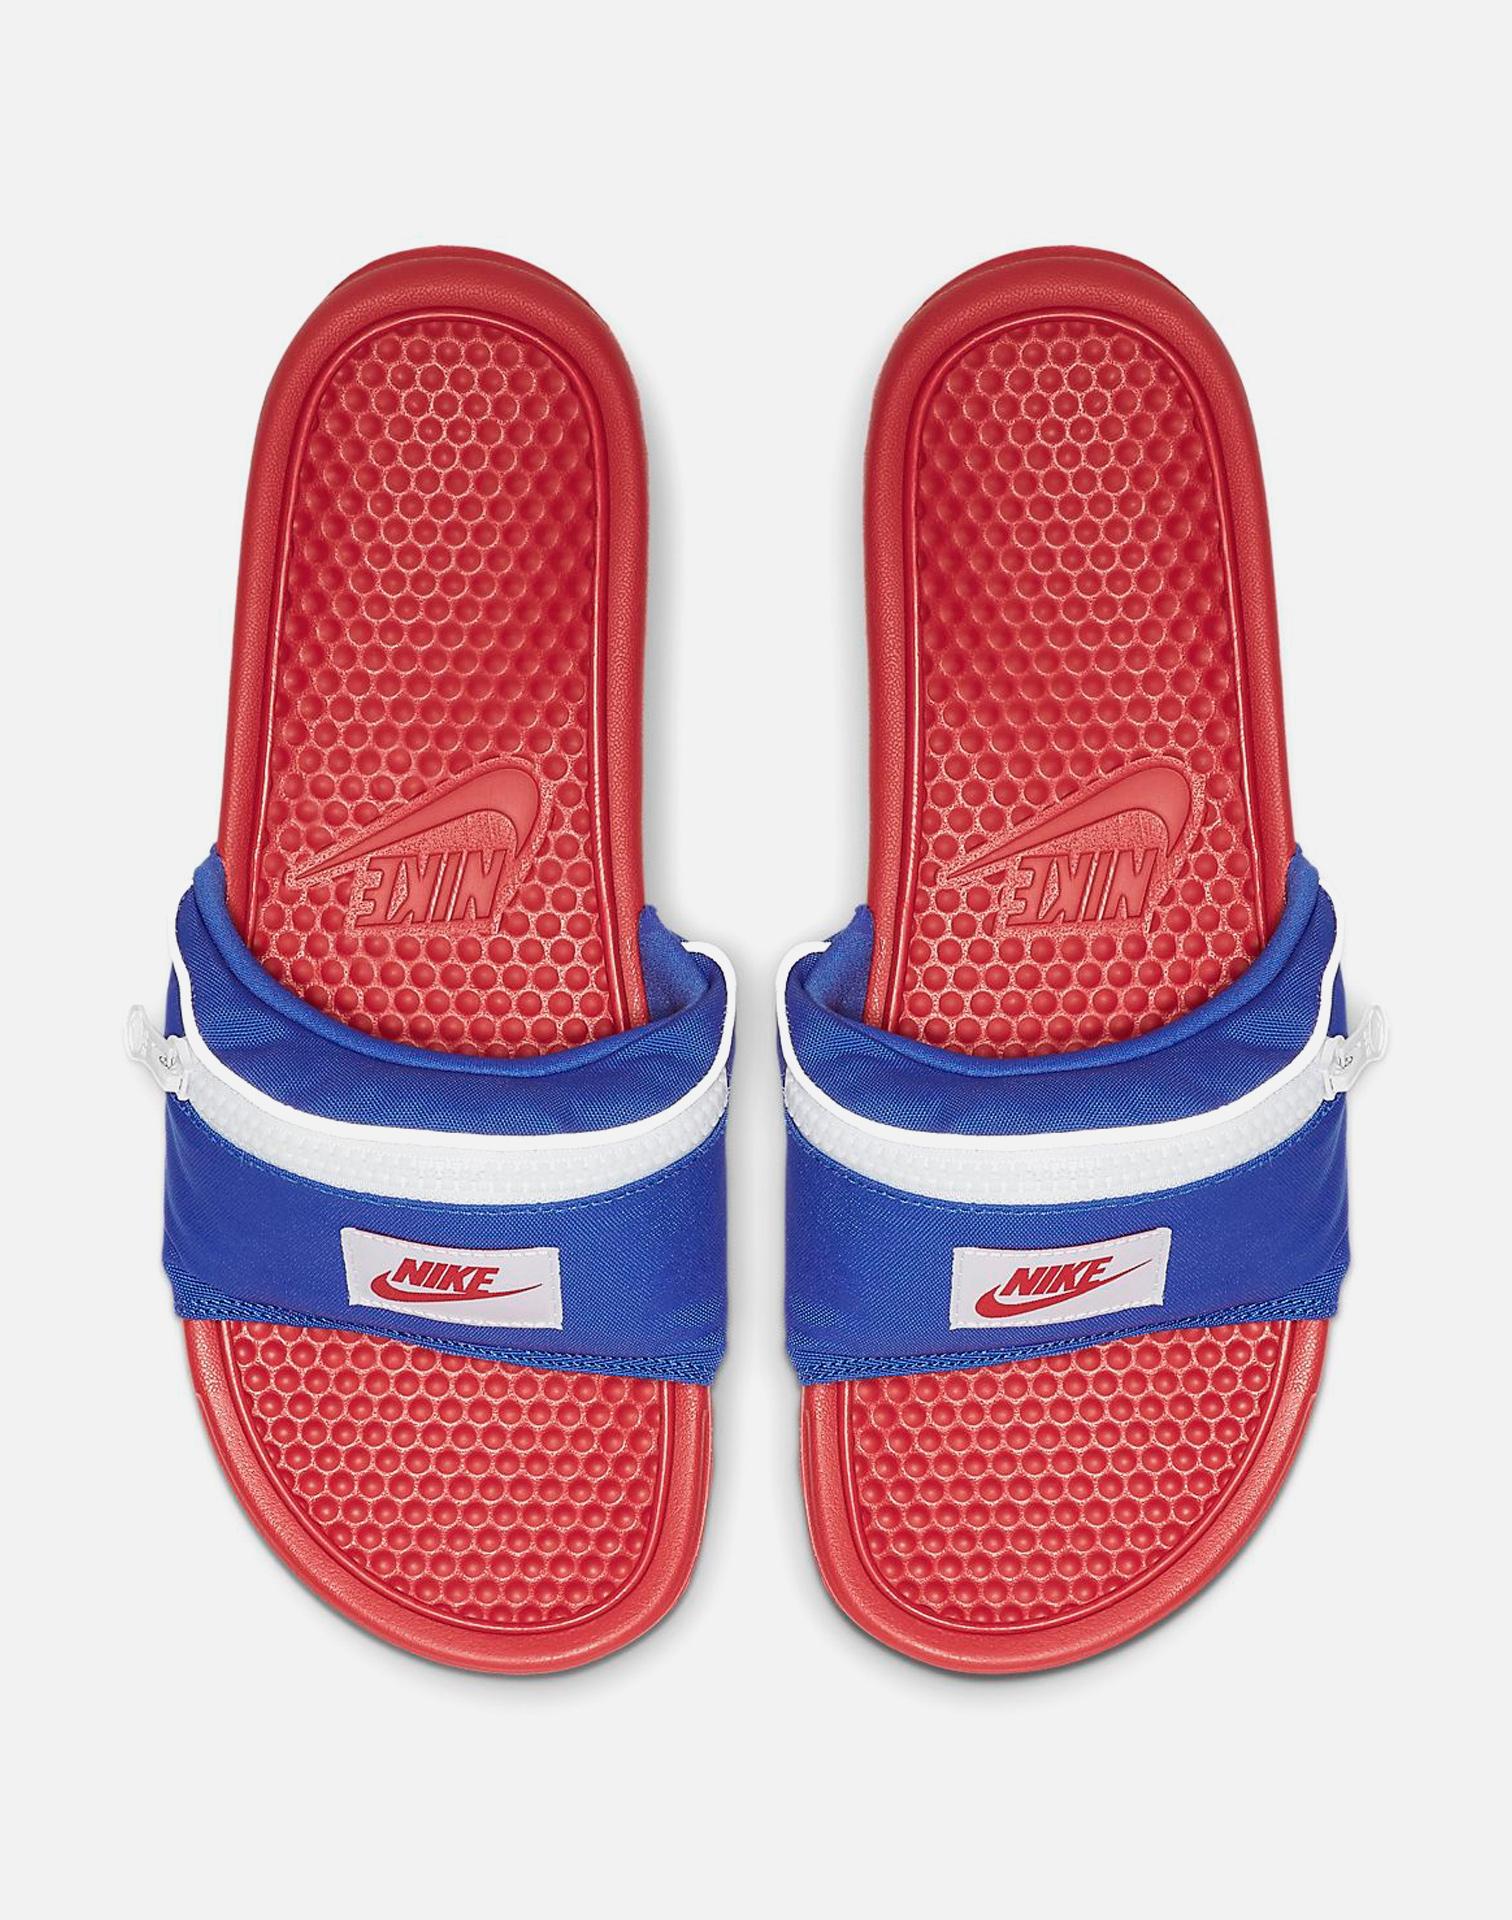 Nike Synthetic Benassi Jdi Fanny Pack Slides in Red - Lyst